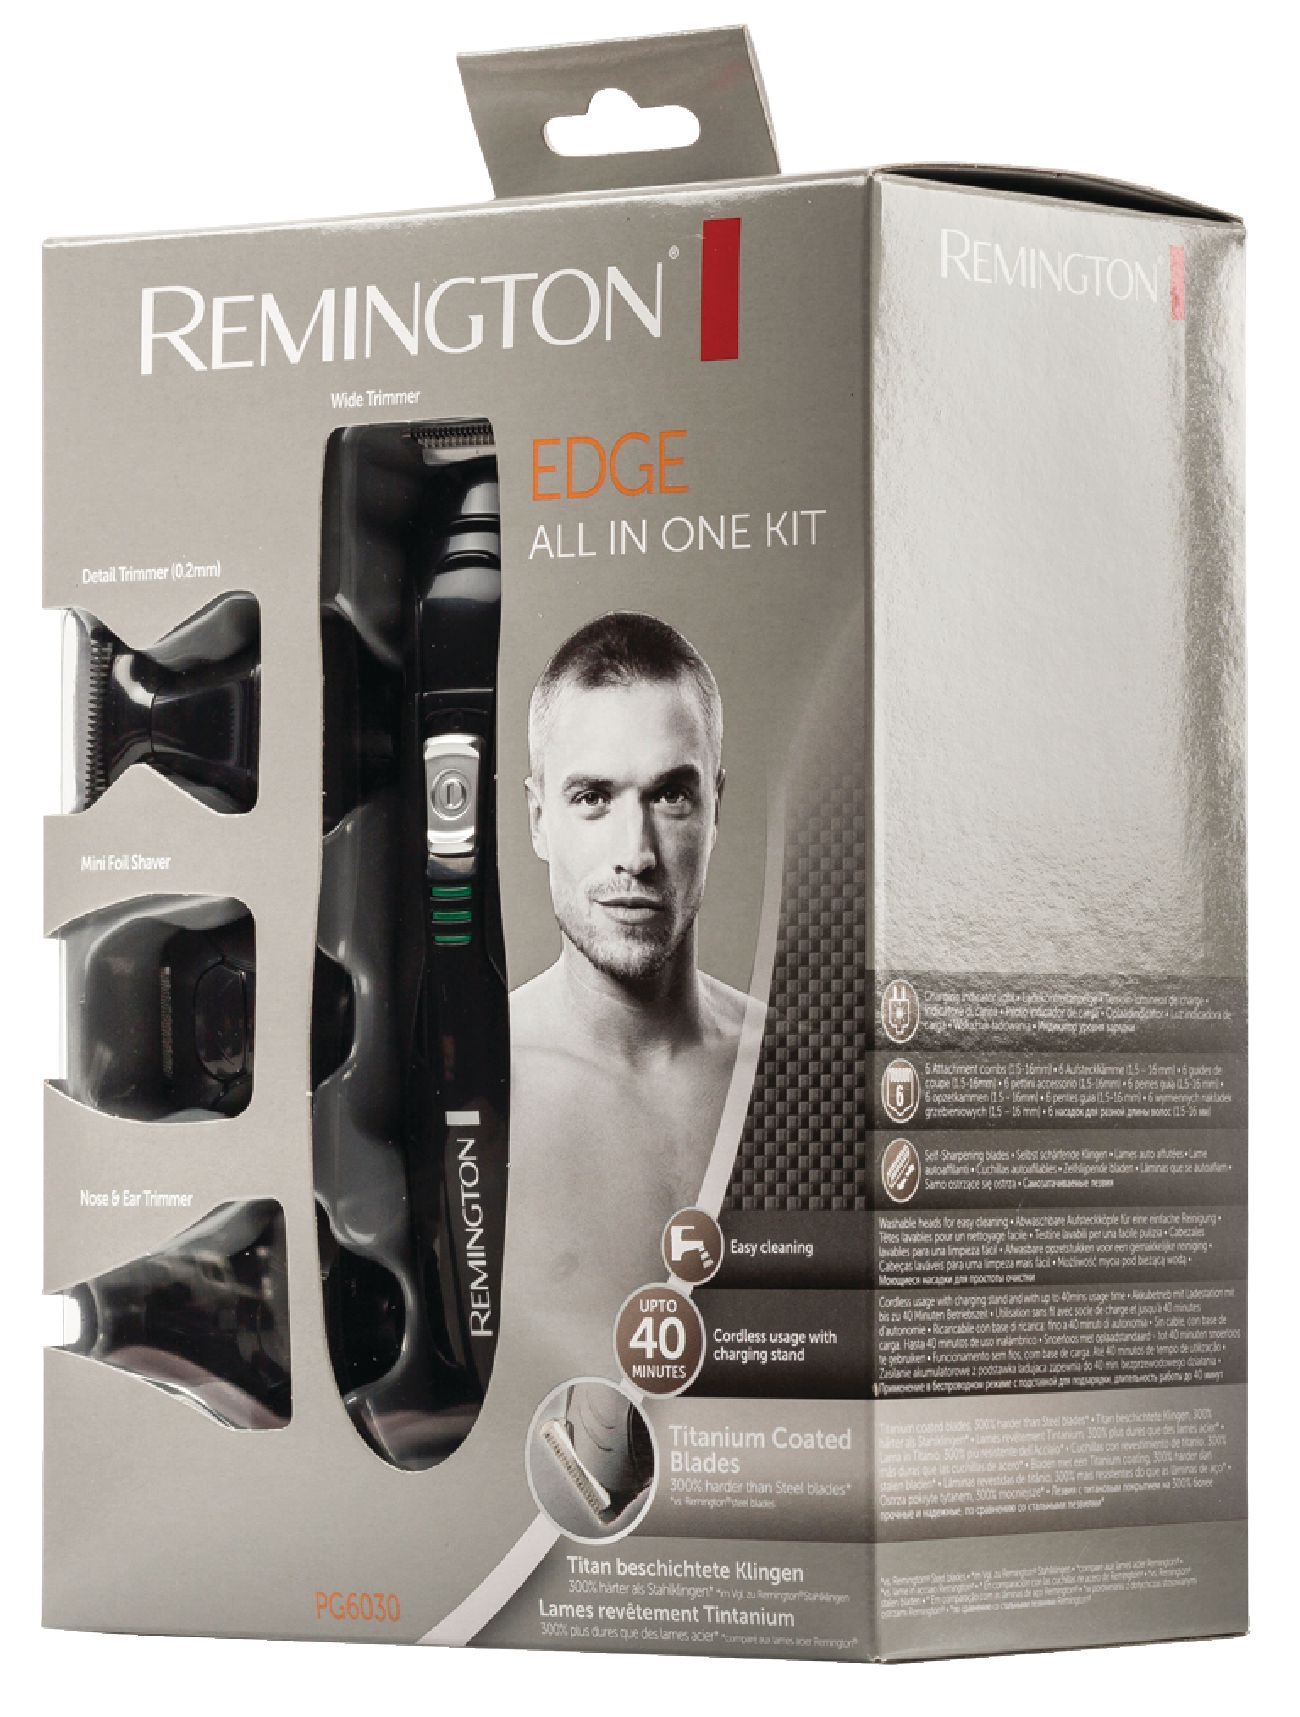 REMINGTON PG6030 MALE GROOMING KIT ALL IN 1